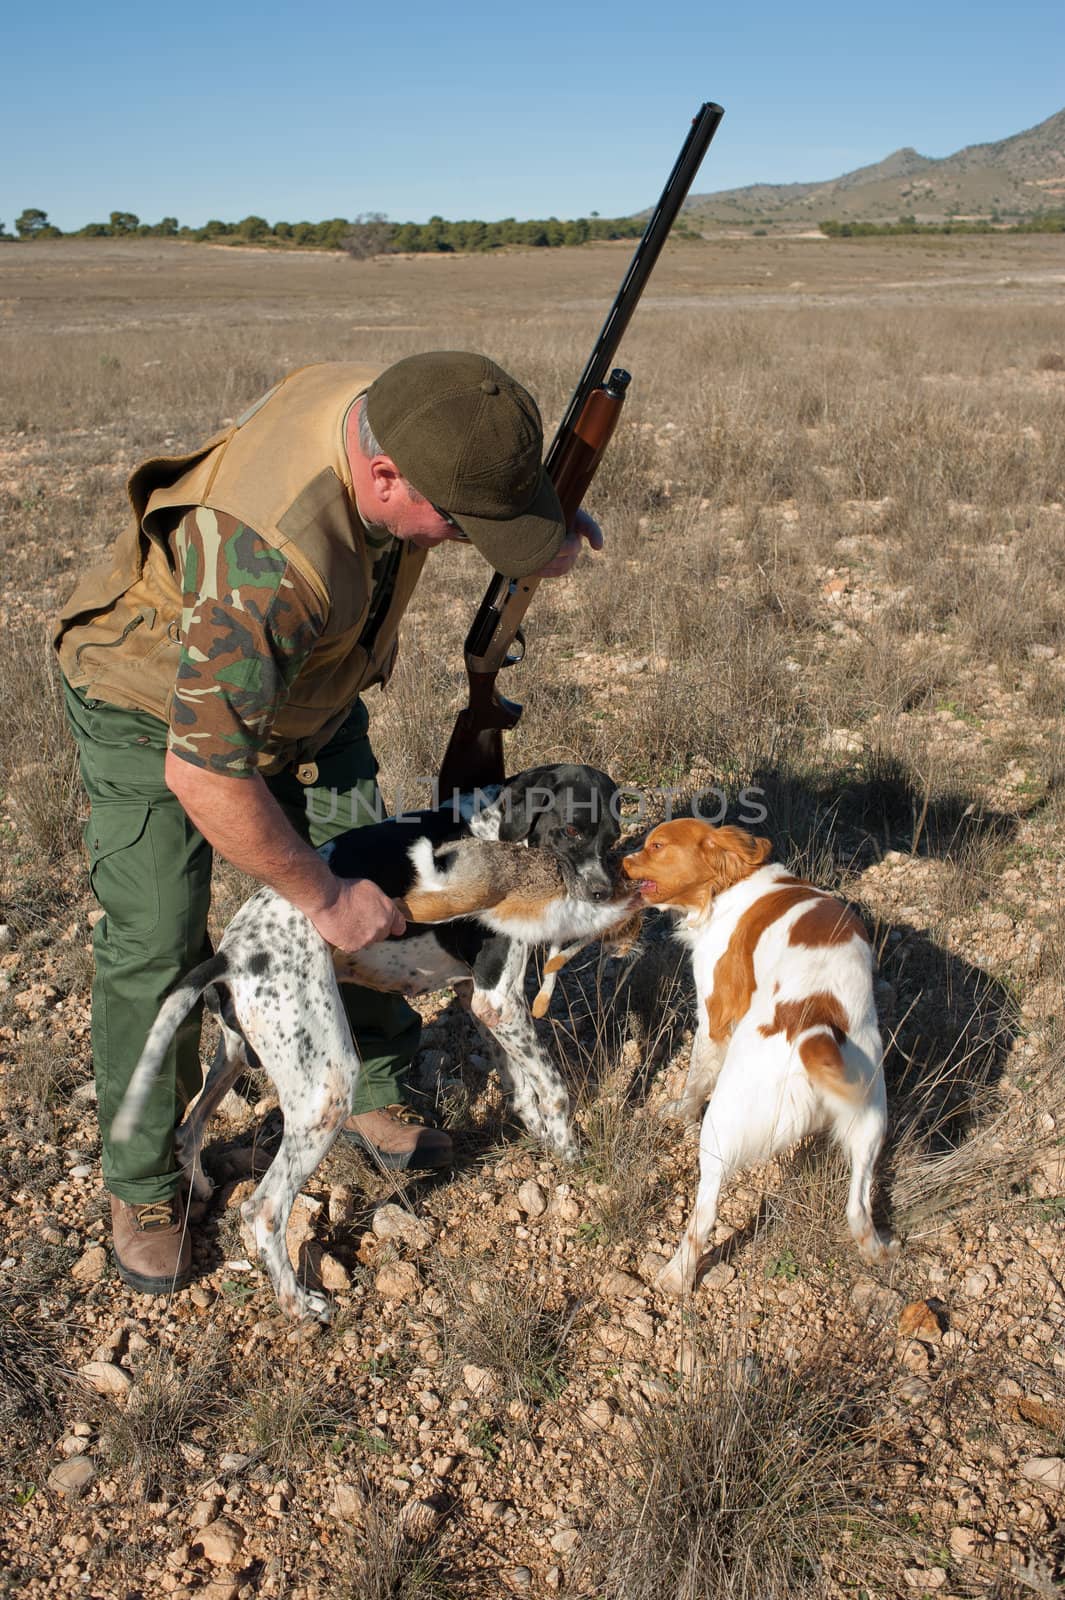 Pointer and brittany hunting dogs retrieving a hare